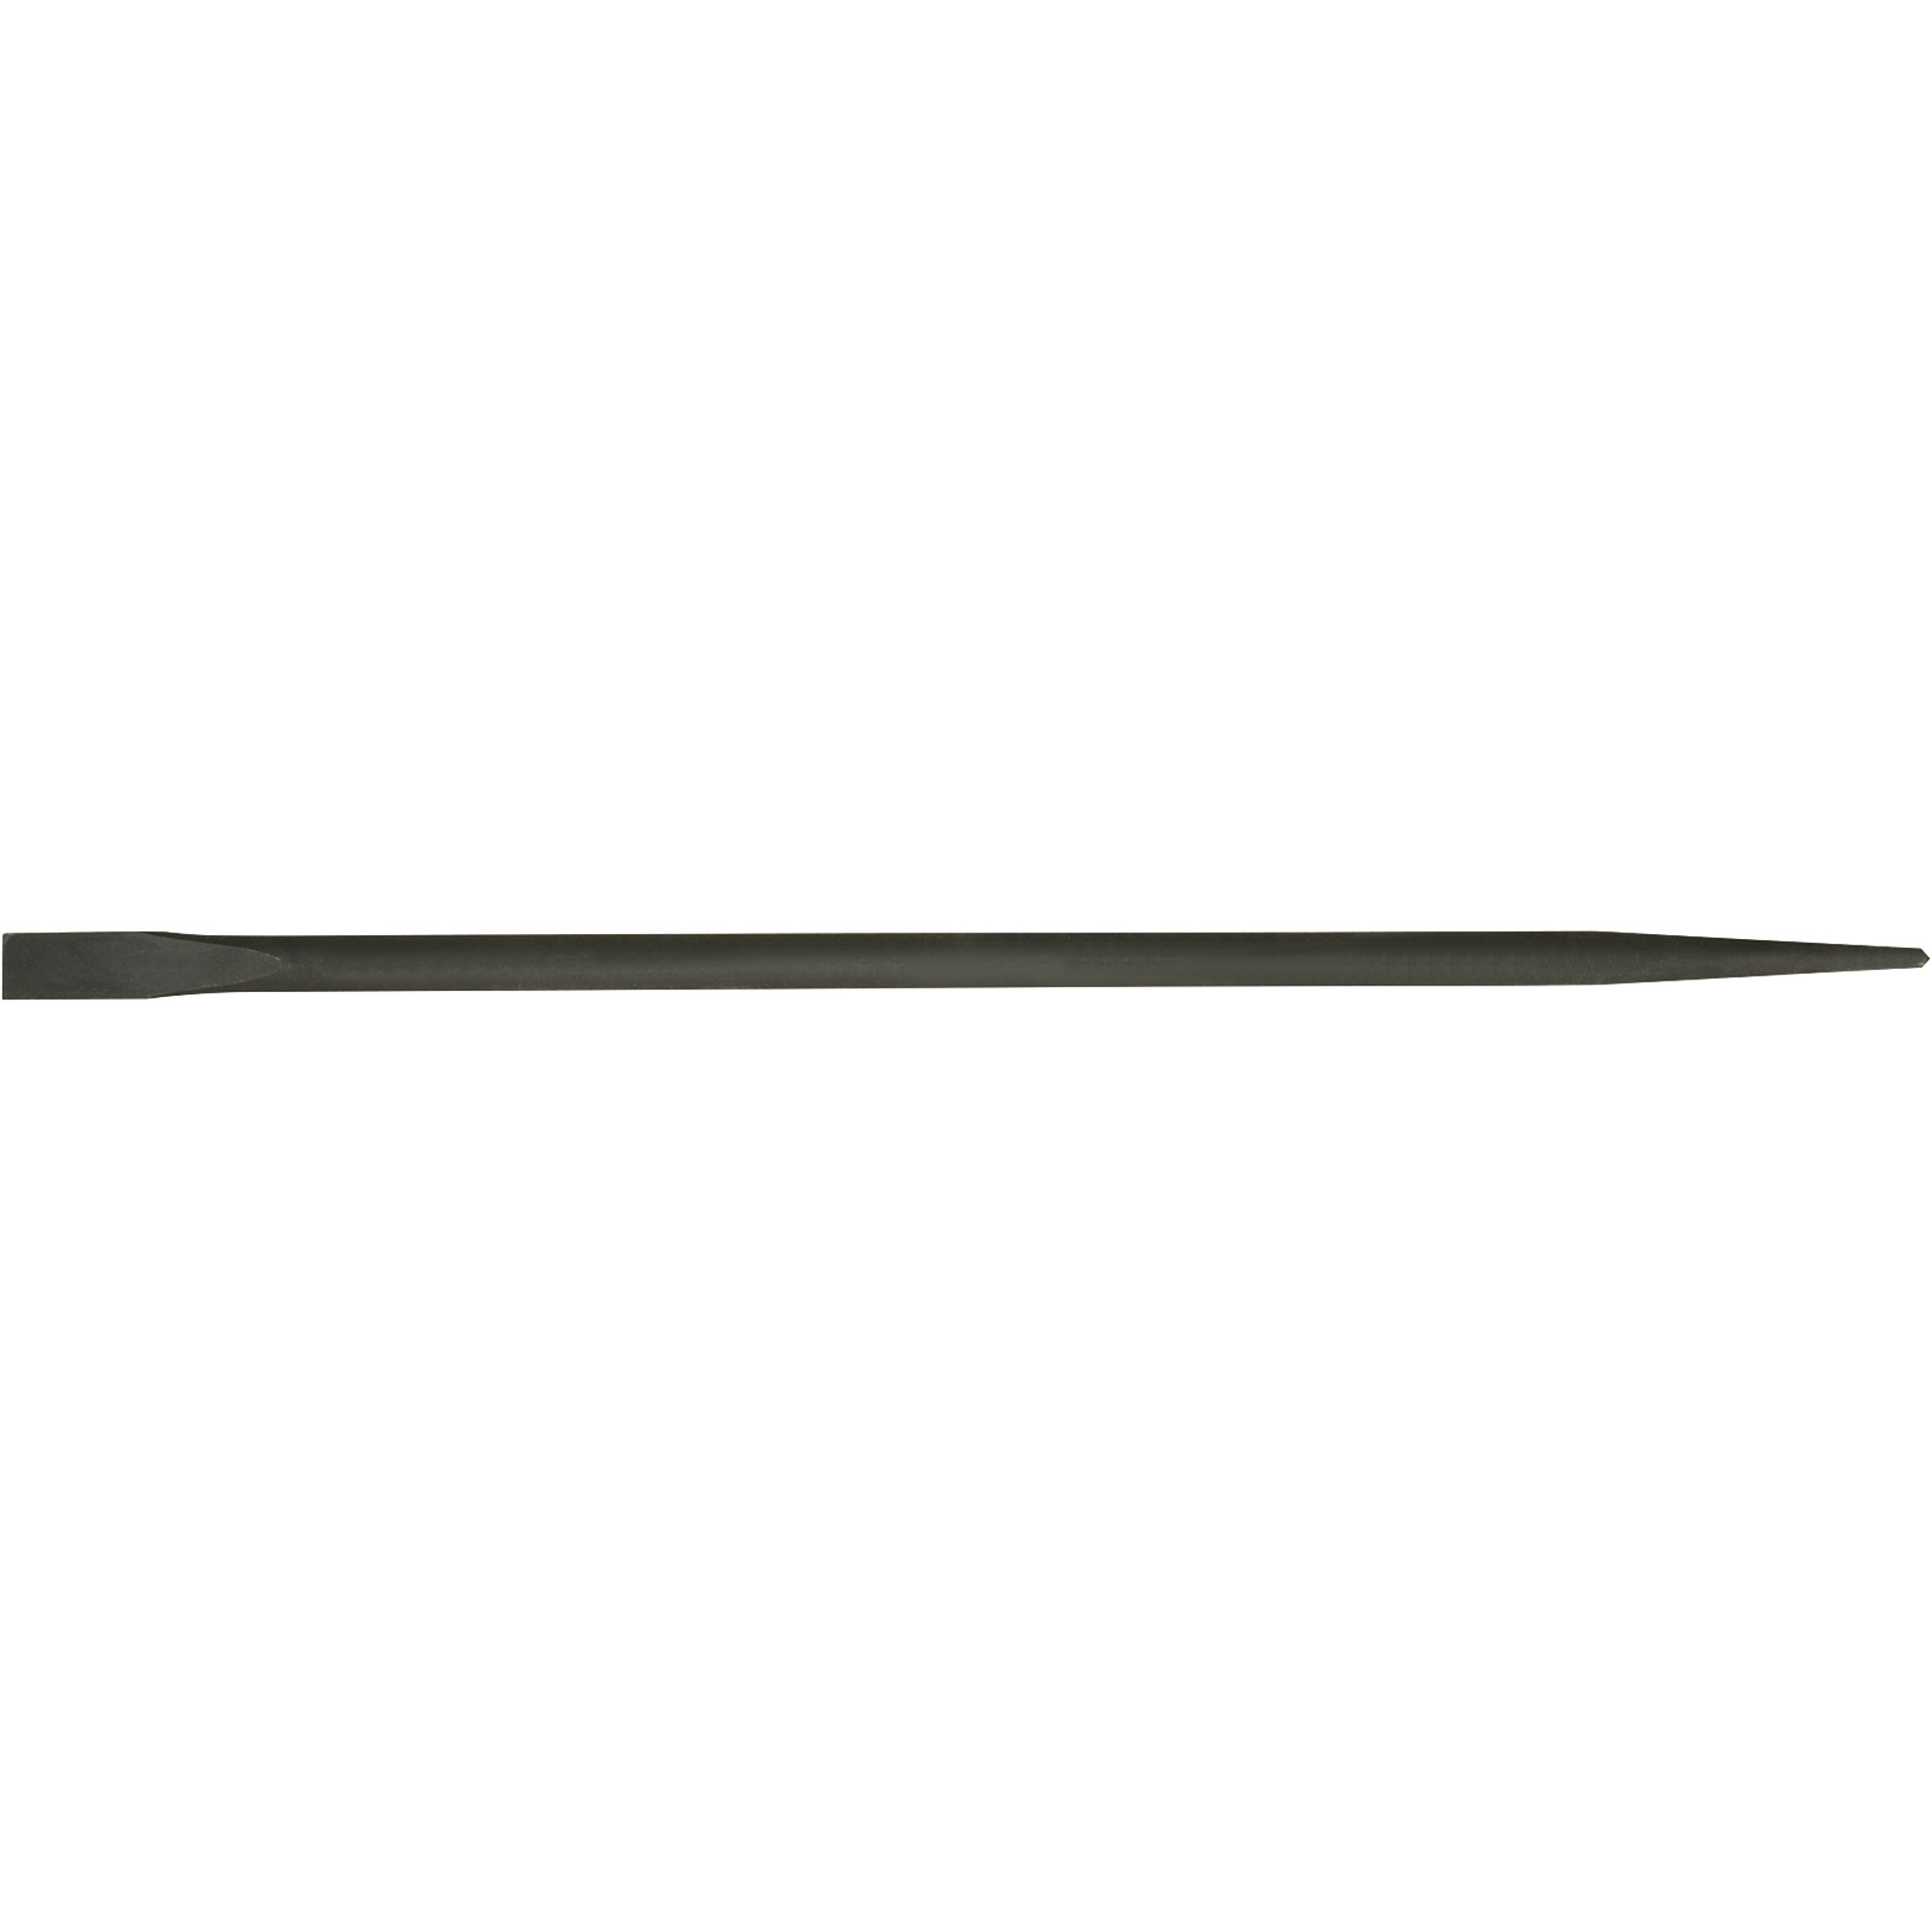 Ironton Connecting Round Bar, 30Inch Long